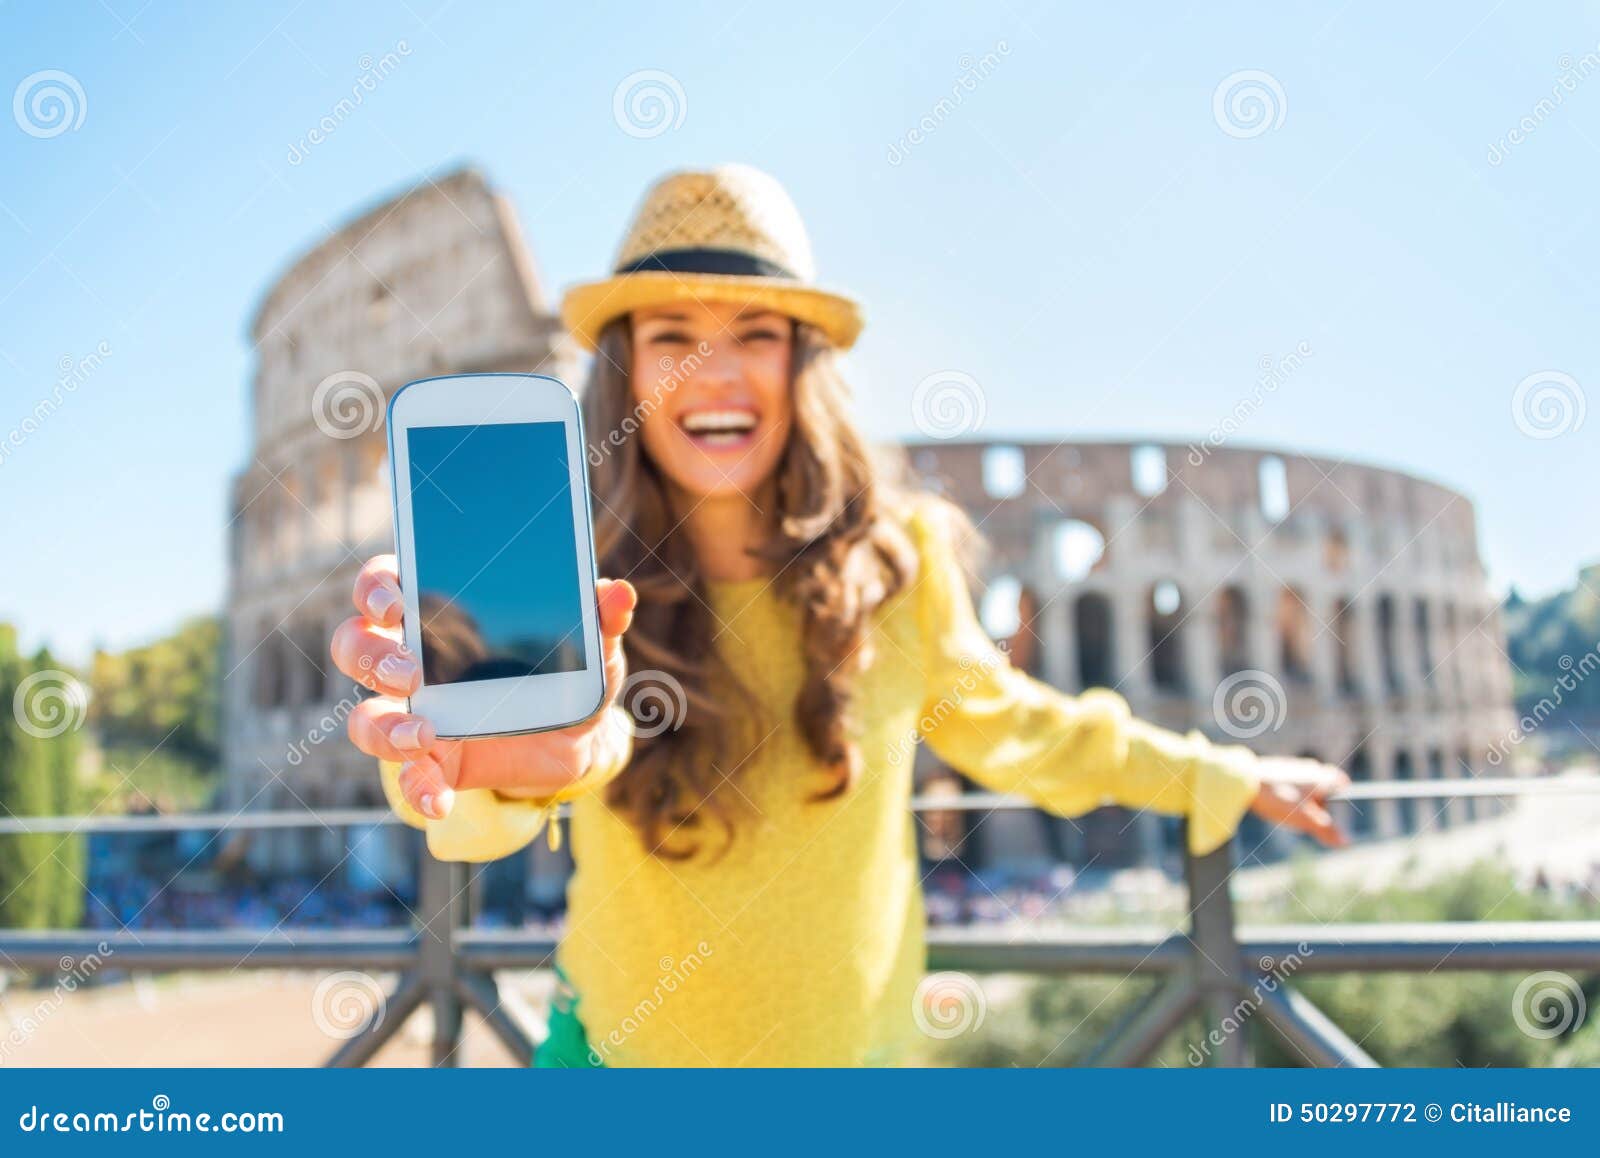 closeup on woman showing cell phone in rome